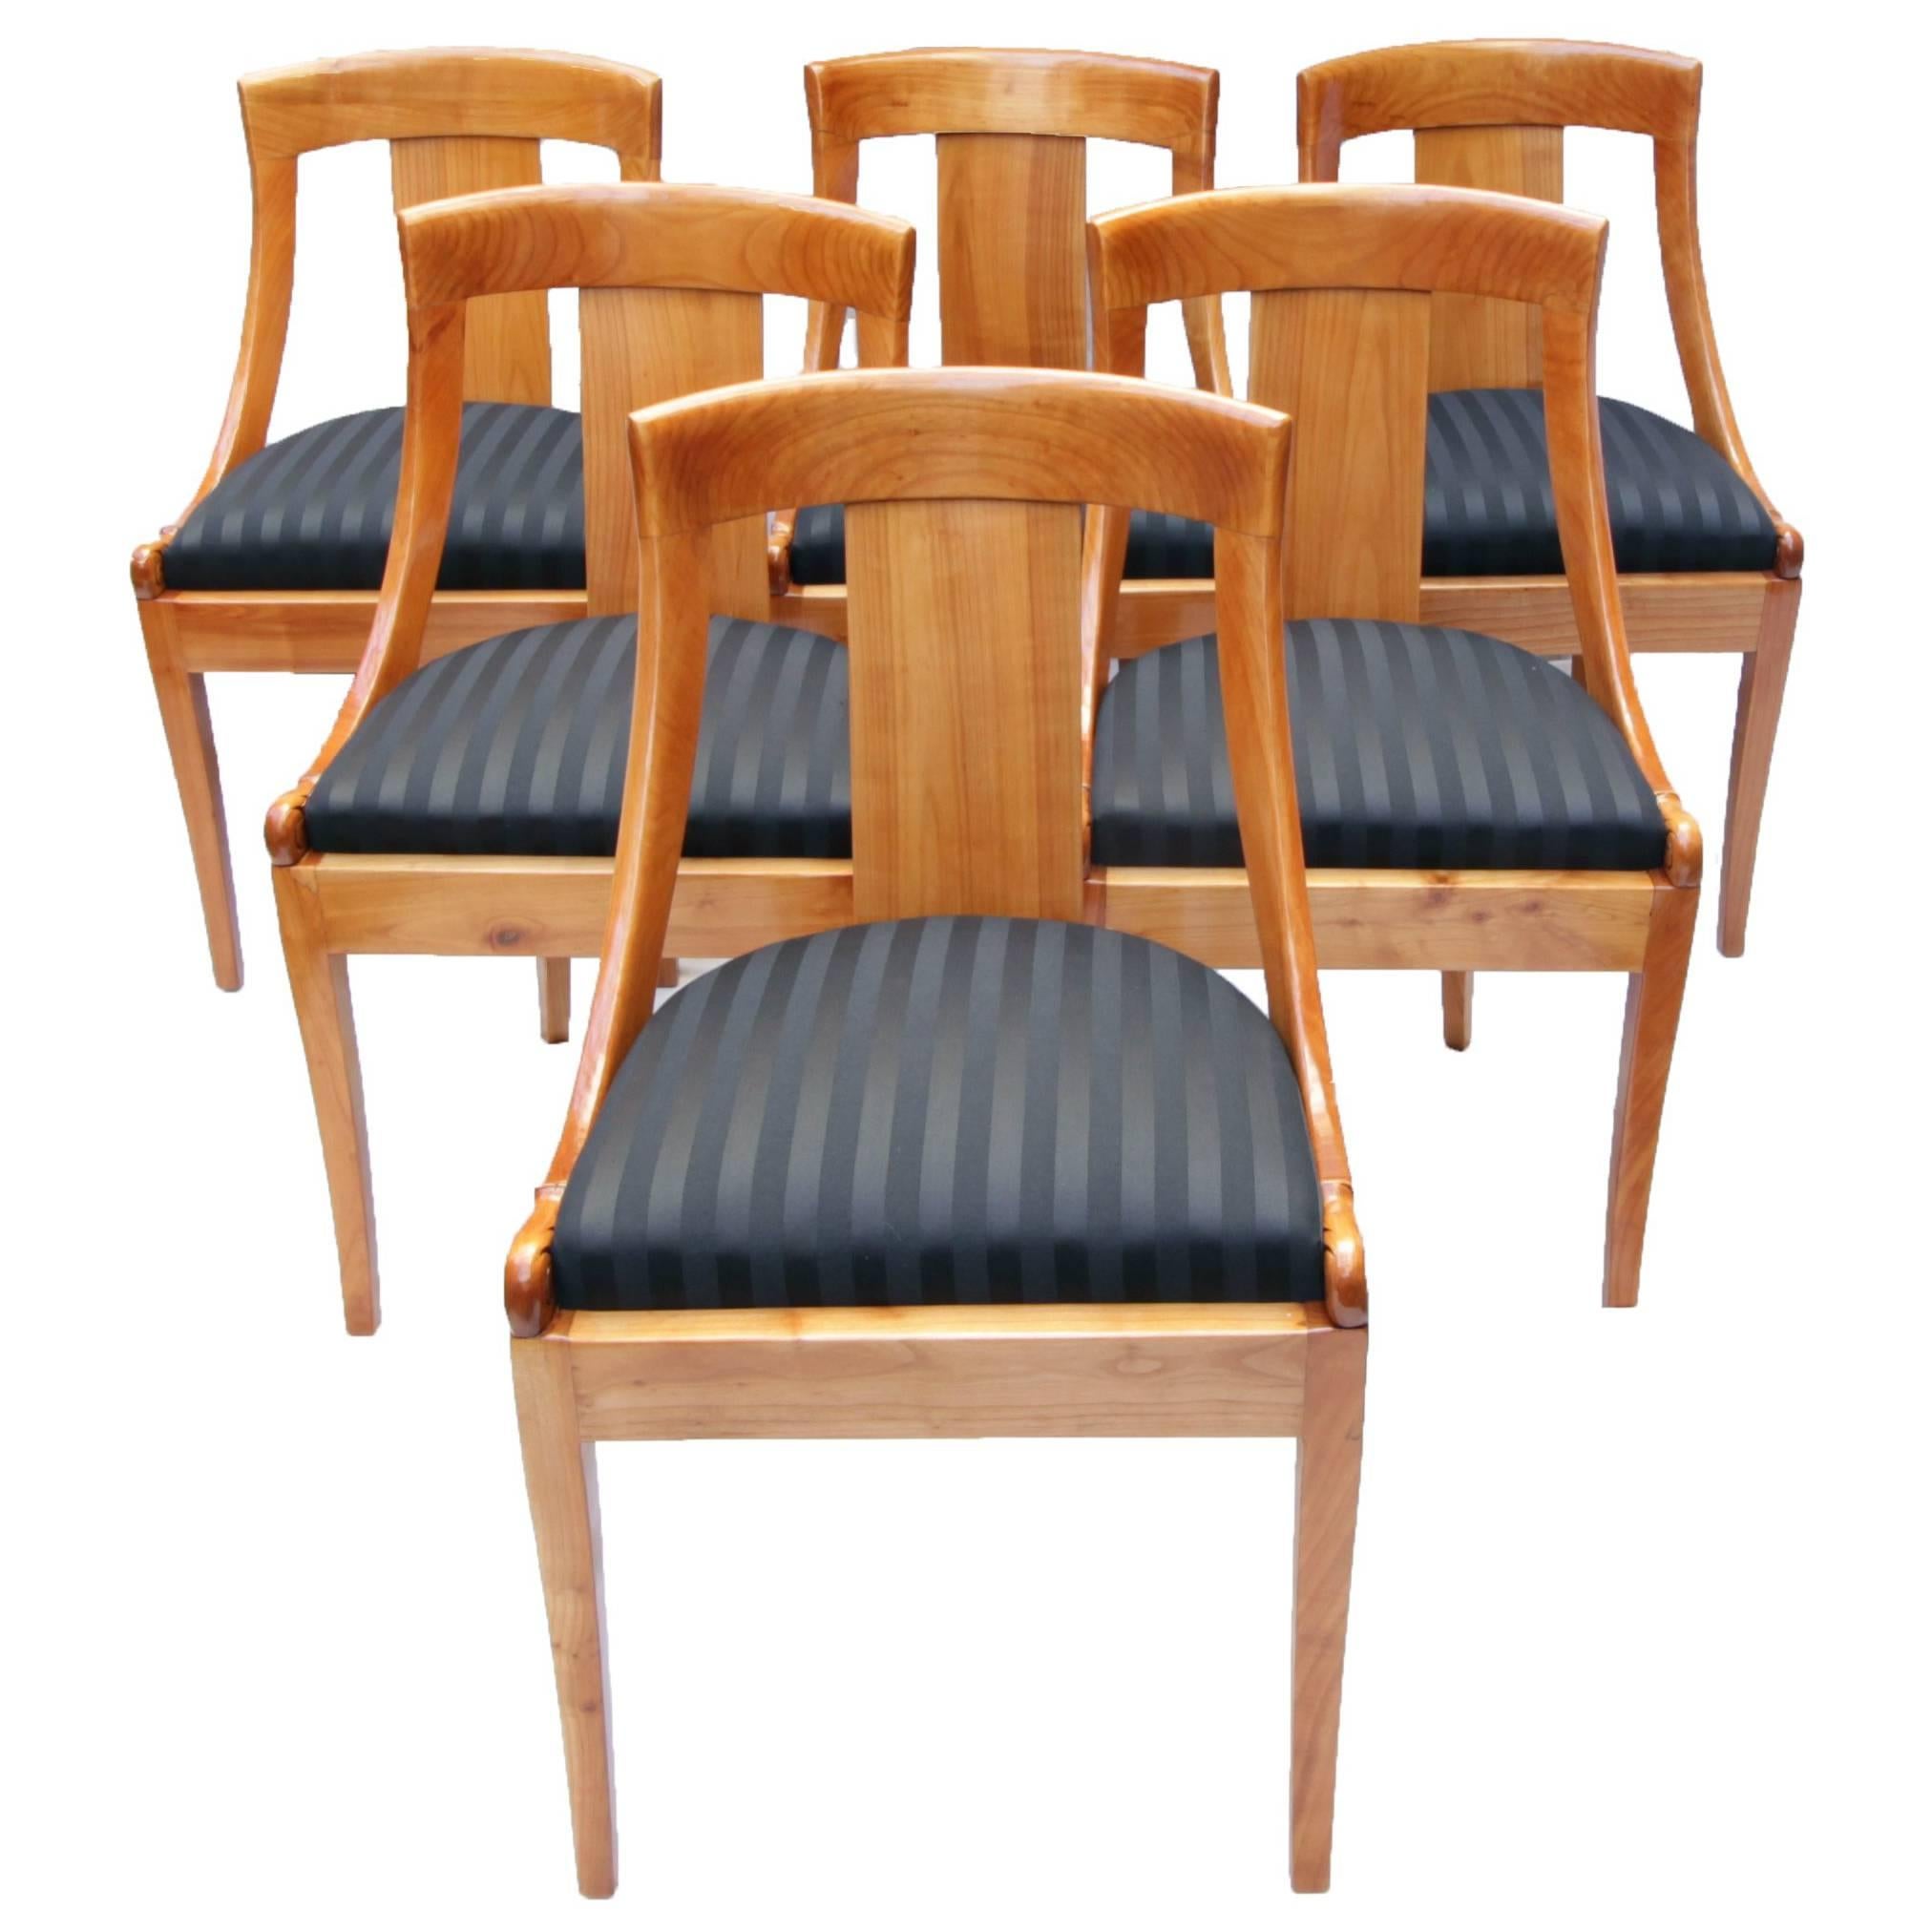 19th Century Biedermeier Gondola Chairs Set of 6, solid Cherry, new upholstered